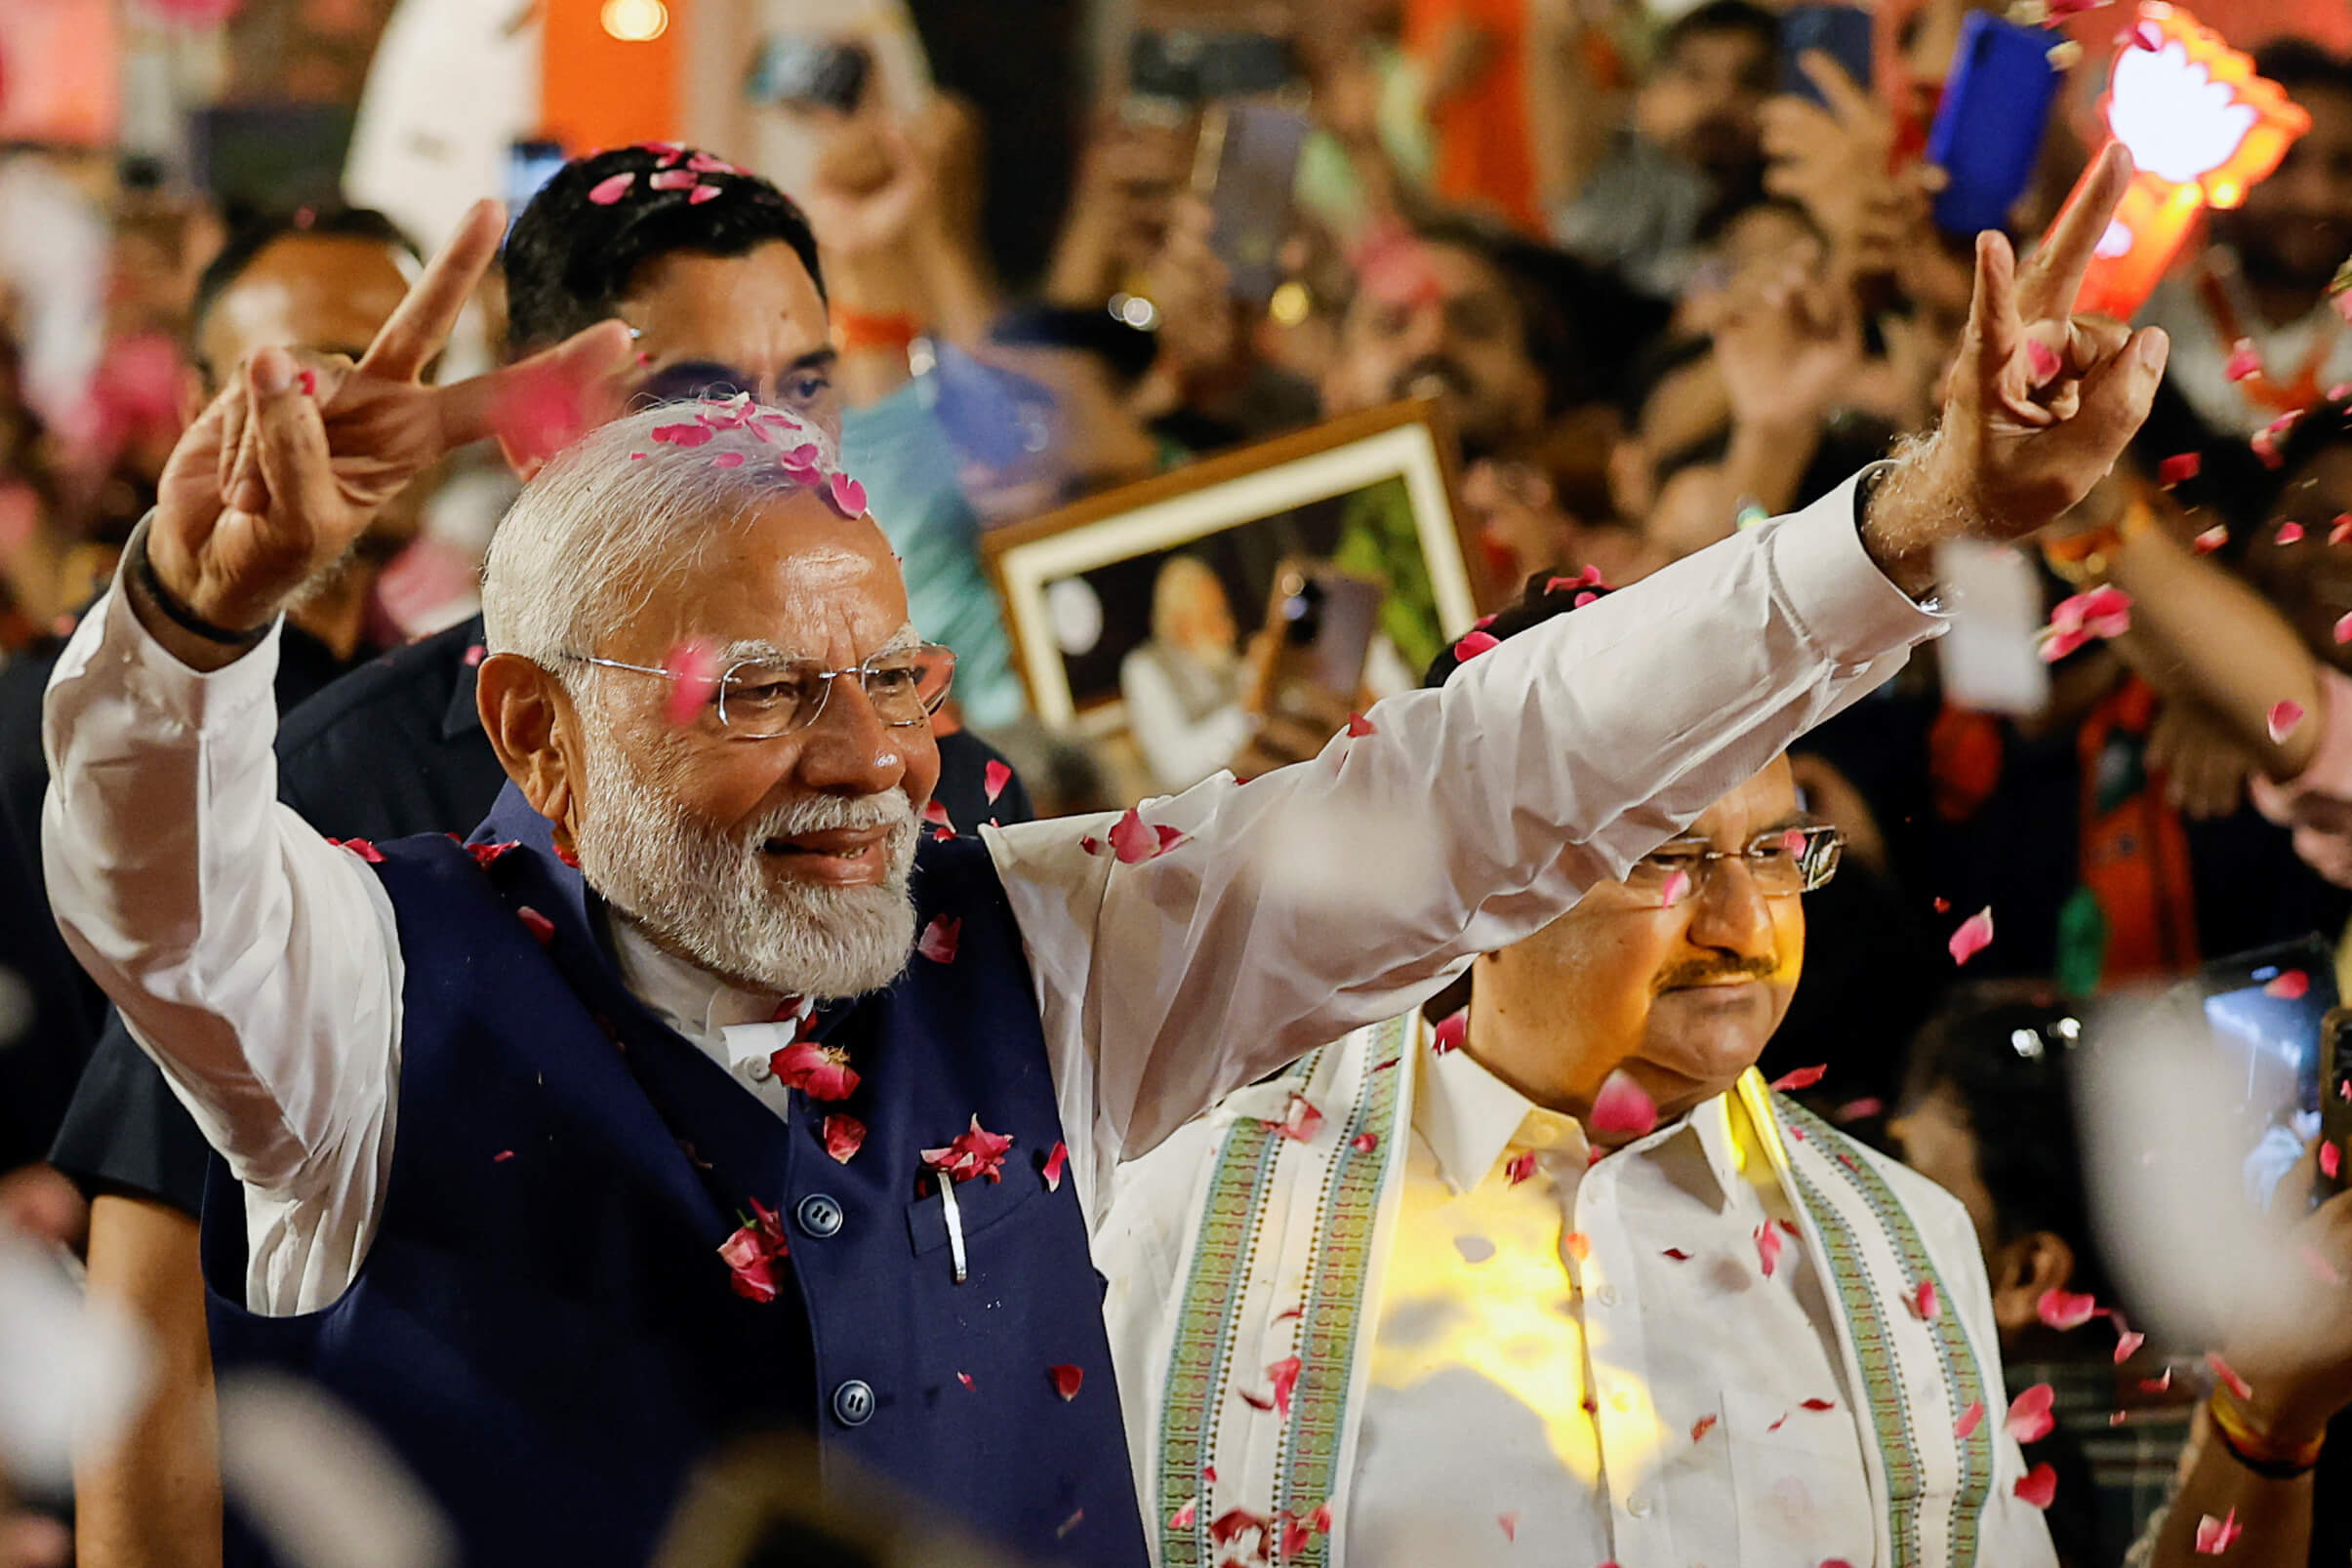 World leaders congratulate PM Modi on his third consecutive election victory